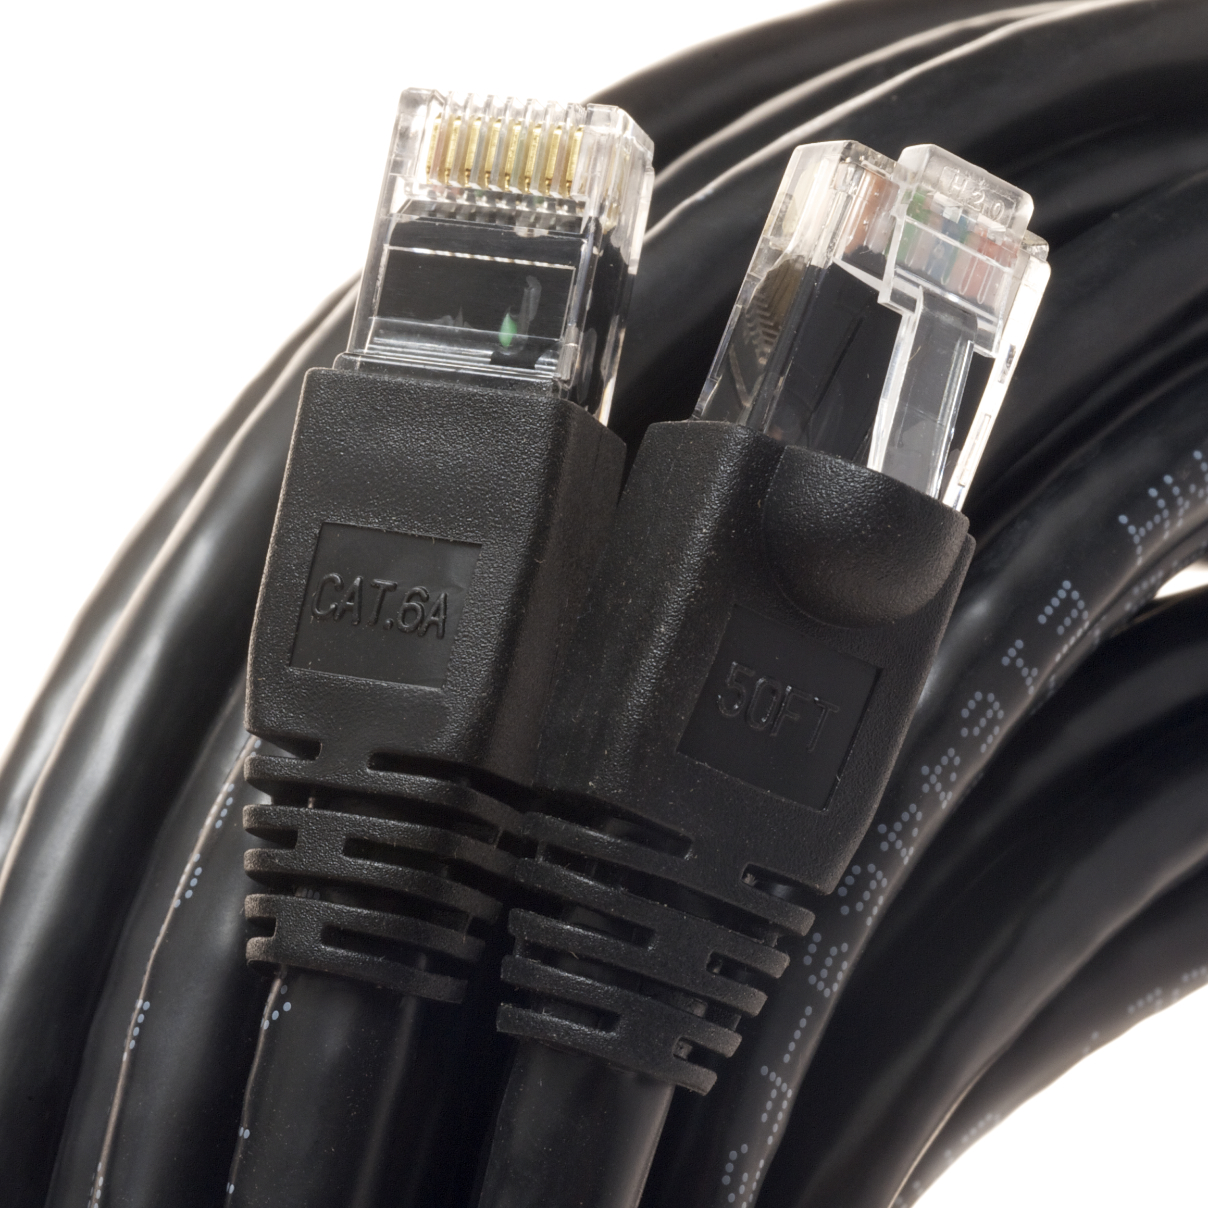 Category 6A Black Network Cables